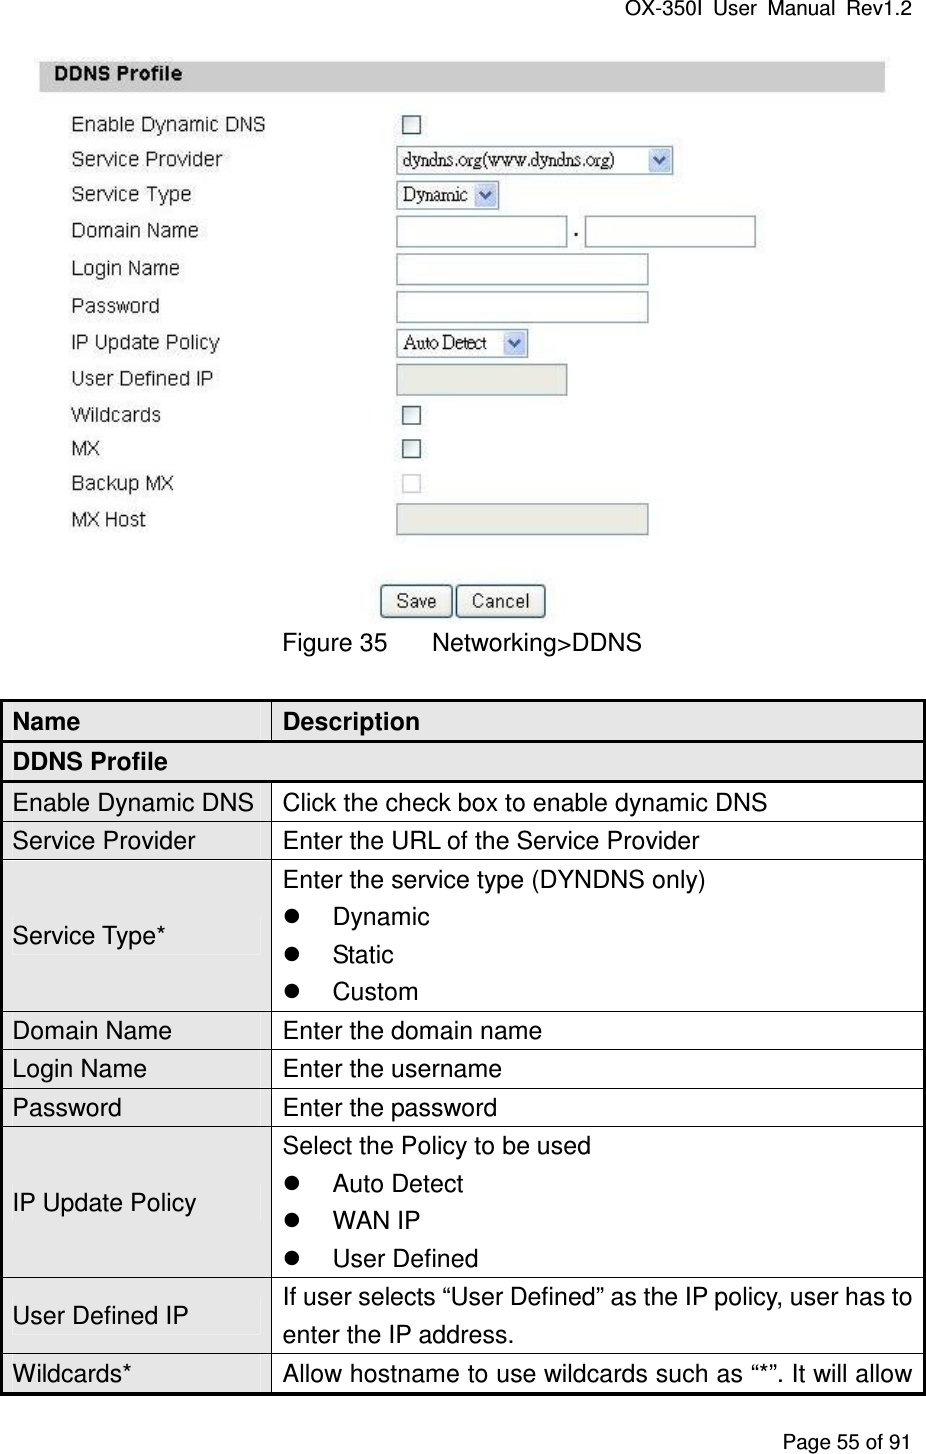 OX-350I  User  Manual  Rev1.2 Page 55 of 91  Figure 35  Networking&gt;DDNS Name  Description DDNS Profile Enable Dynamic DNS Click the check box to enable dynamic DNS Service Provider  Enter the URL of the Service Provider Service Type* Enter the service type (DYNDNS only)   Dynamic   Static   Custom Domain Name  Enter the domain name Login Name  Enter the username Password  Enter the password IP Update Policy Select the Policy to be used   Auto Detect   WAN IP   User Defined User Defined IP  If user selects “User Defined” as the IP policy, user has to enter the IP address. Wildcards*  Allow hostname to use wildcards such as “*”. It will allow 